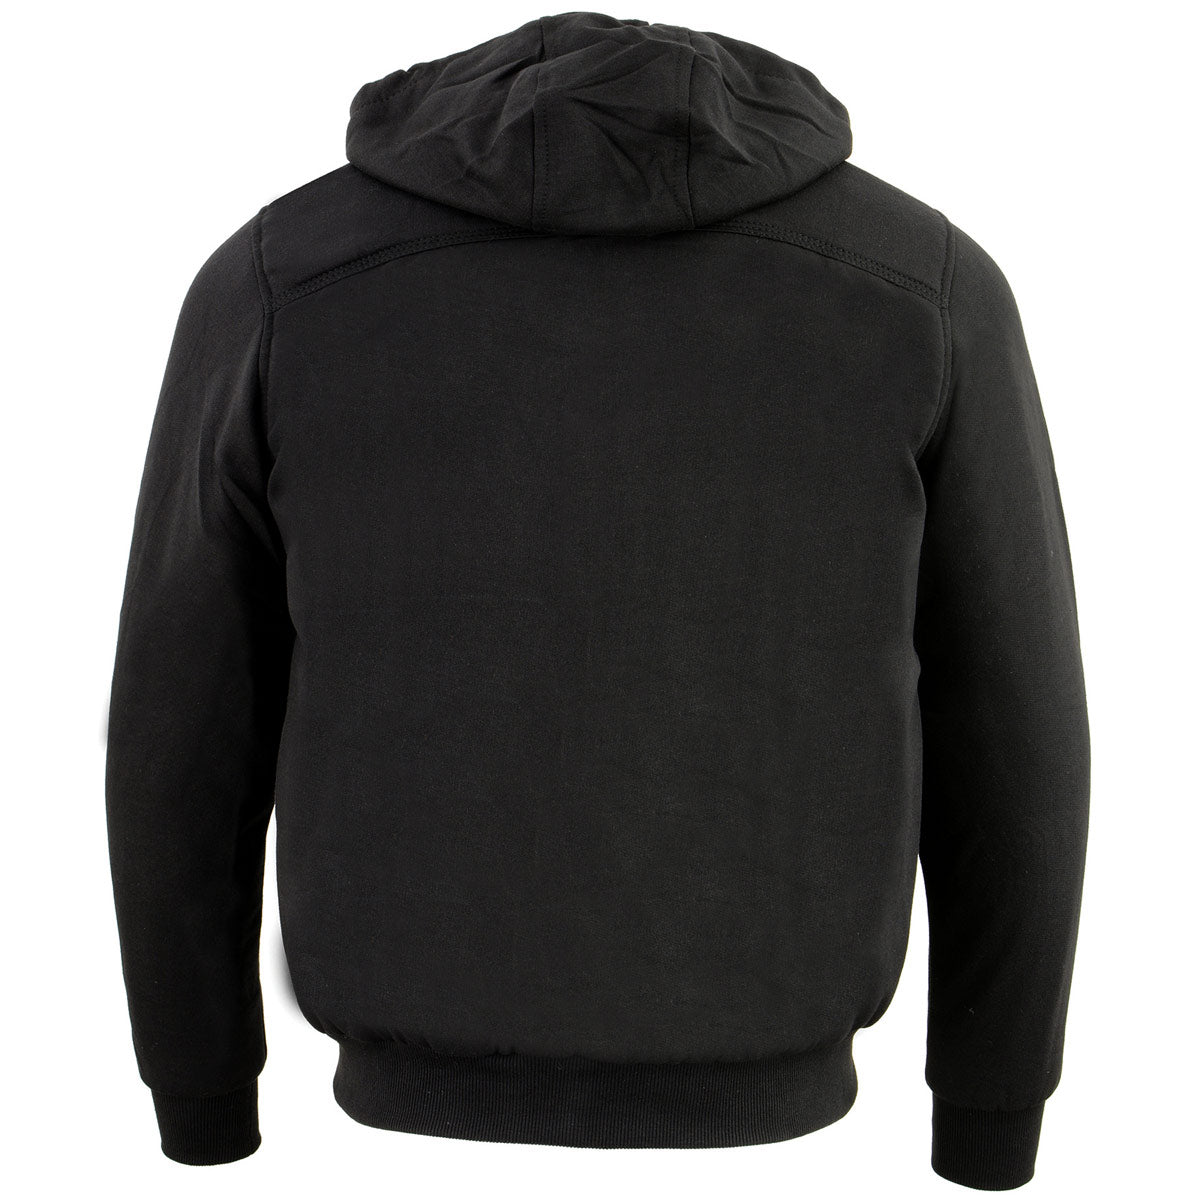 The Bikers Zone BZ2813 Men's Black Ultimate Heated Hoodie with 12V Battery (Included)